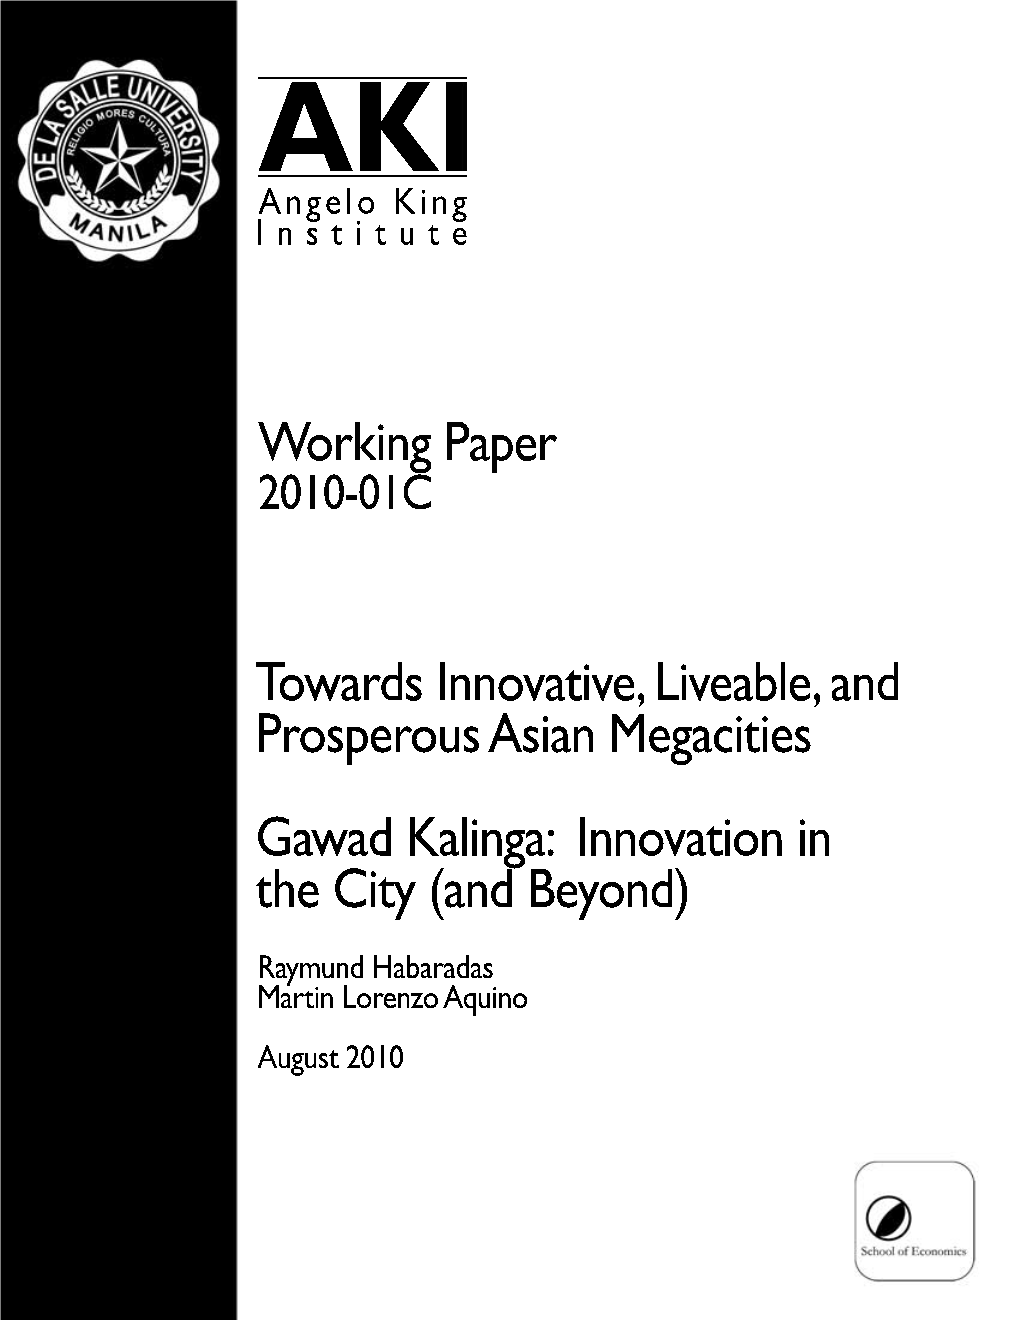 Gawad Kalinga (GK) Is an Innovative Approach That Could Be the Key to Solving Poverty and Homelessness in the Philippines